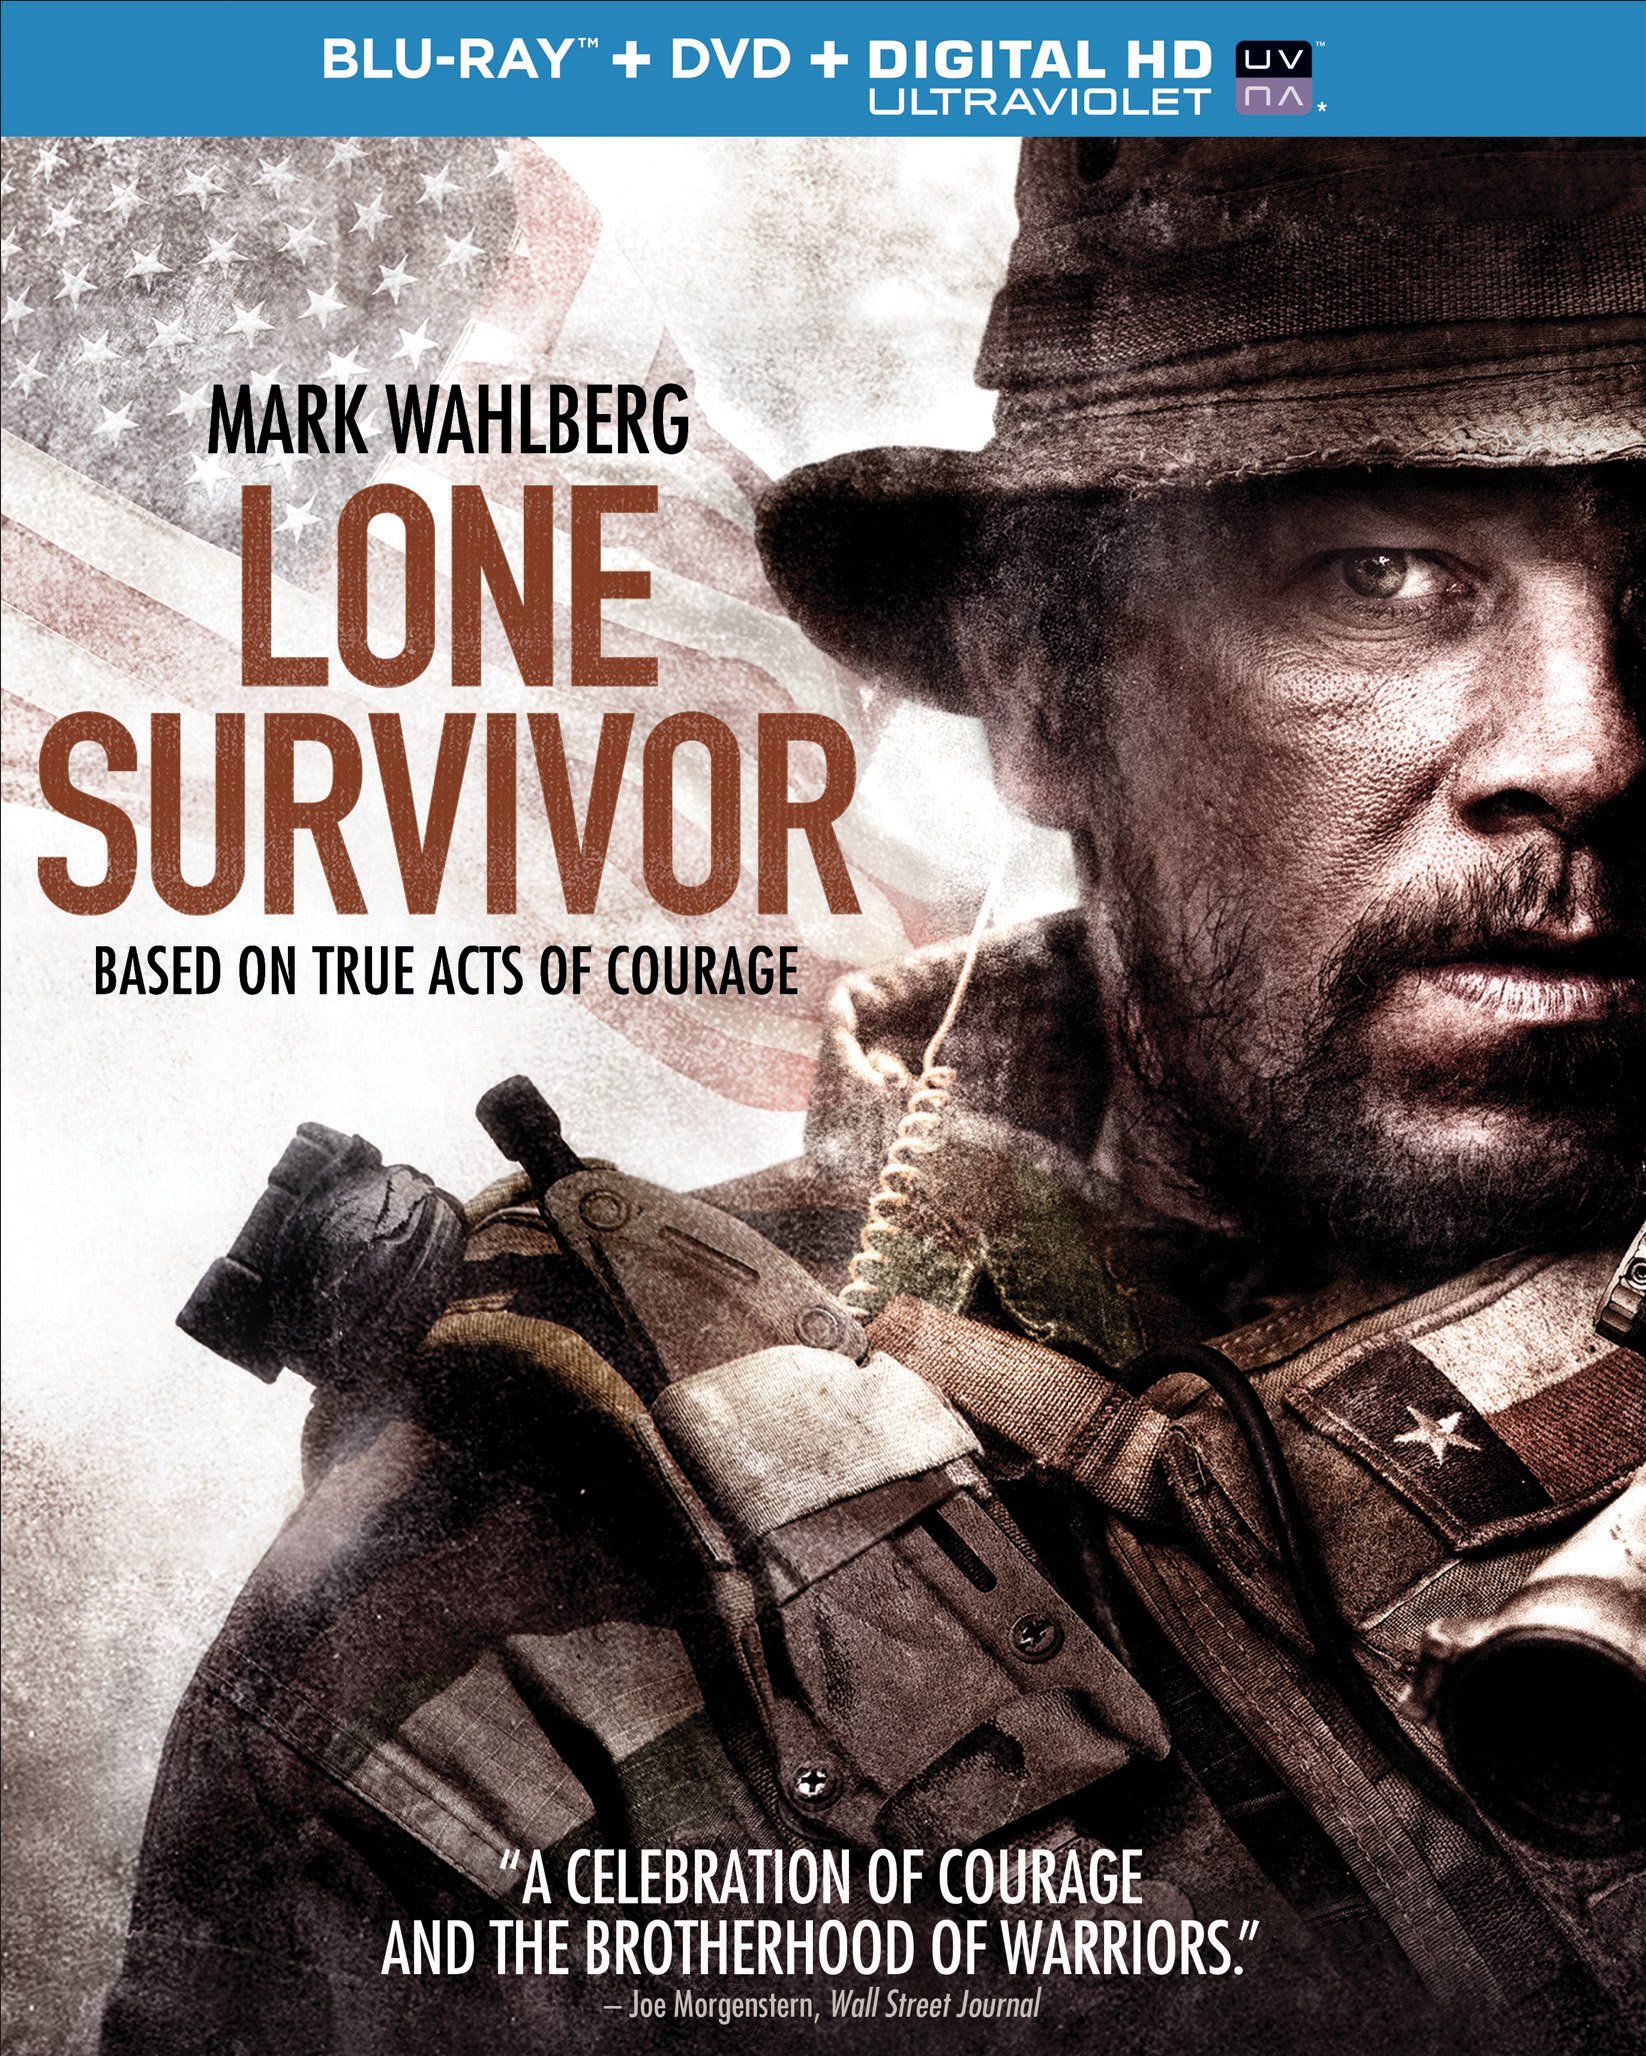 Lone Survivor was released on Blu-ray on June 3, 2014